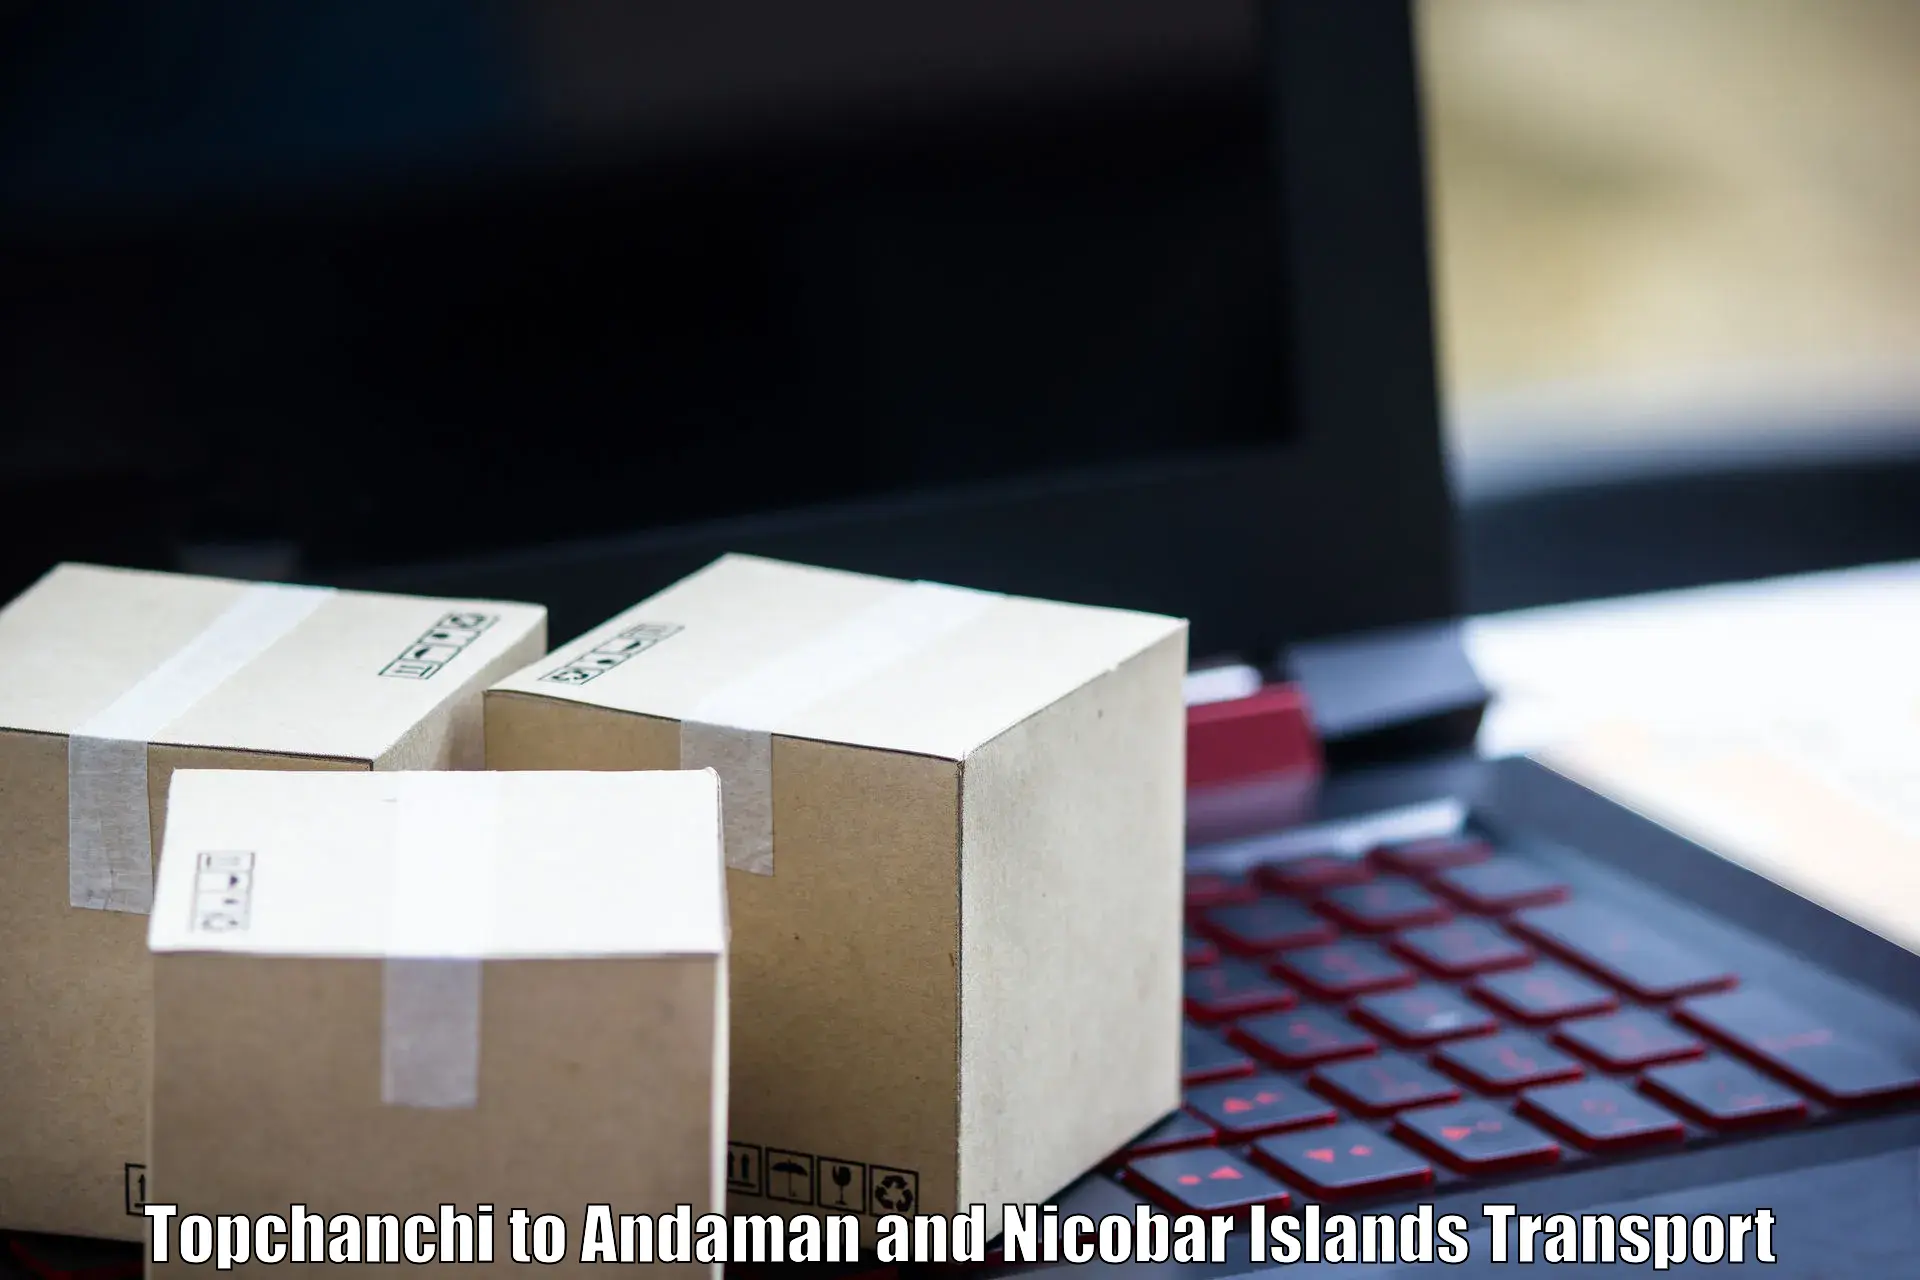 Pick up transport service Topchanchi to North And Middle Andaman